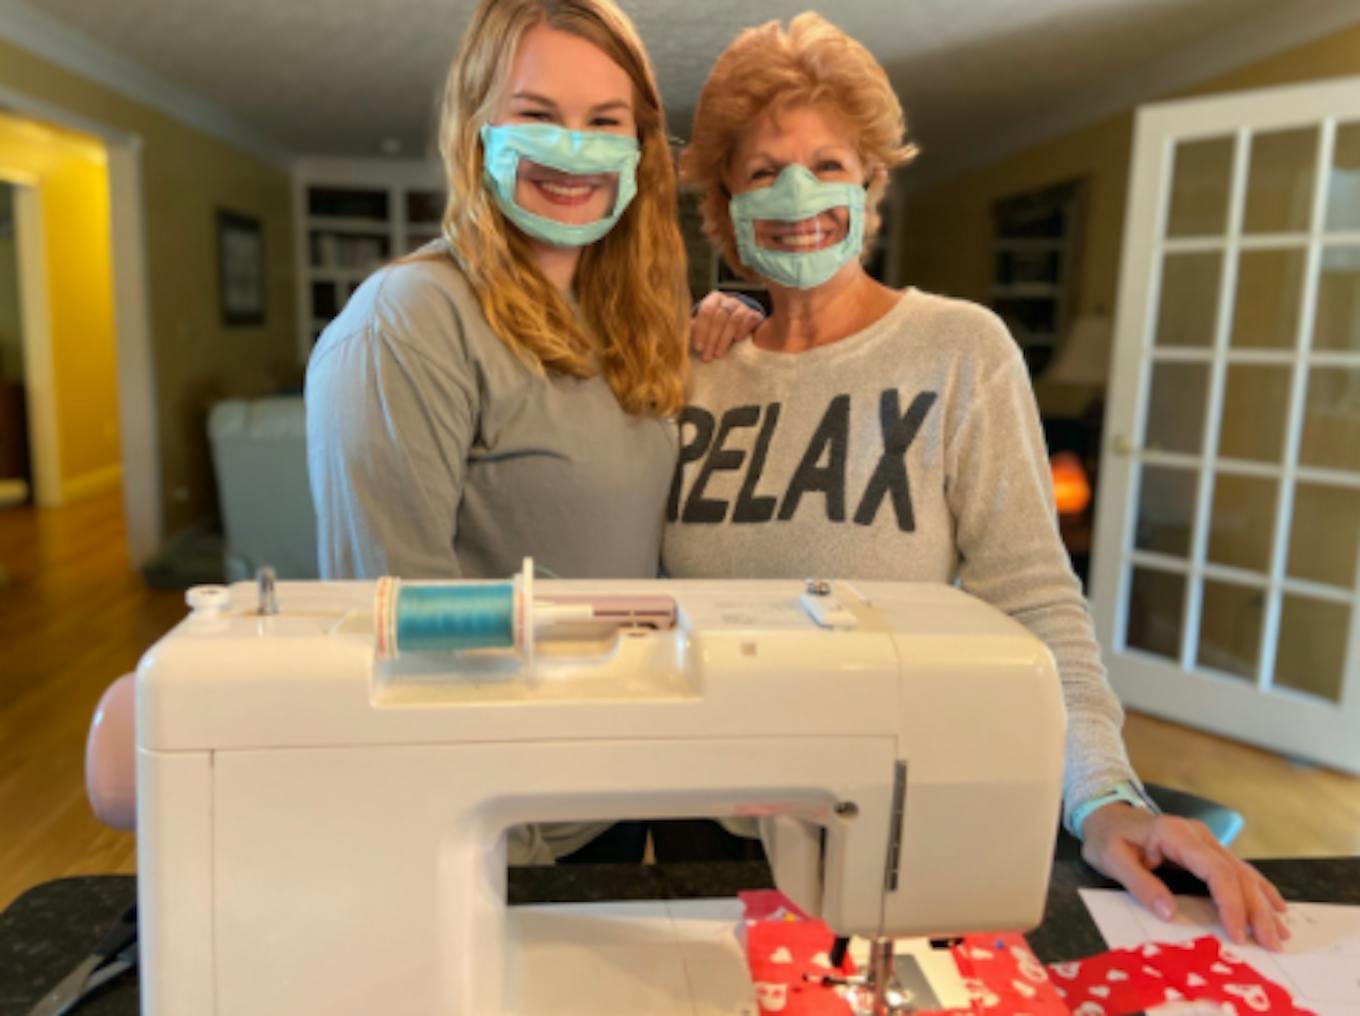 Ashley Lawrence (left) poses with her mother while they both wear a mask made for the deaf and hard of hearing community.